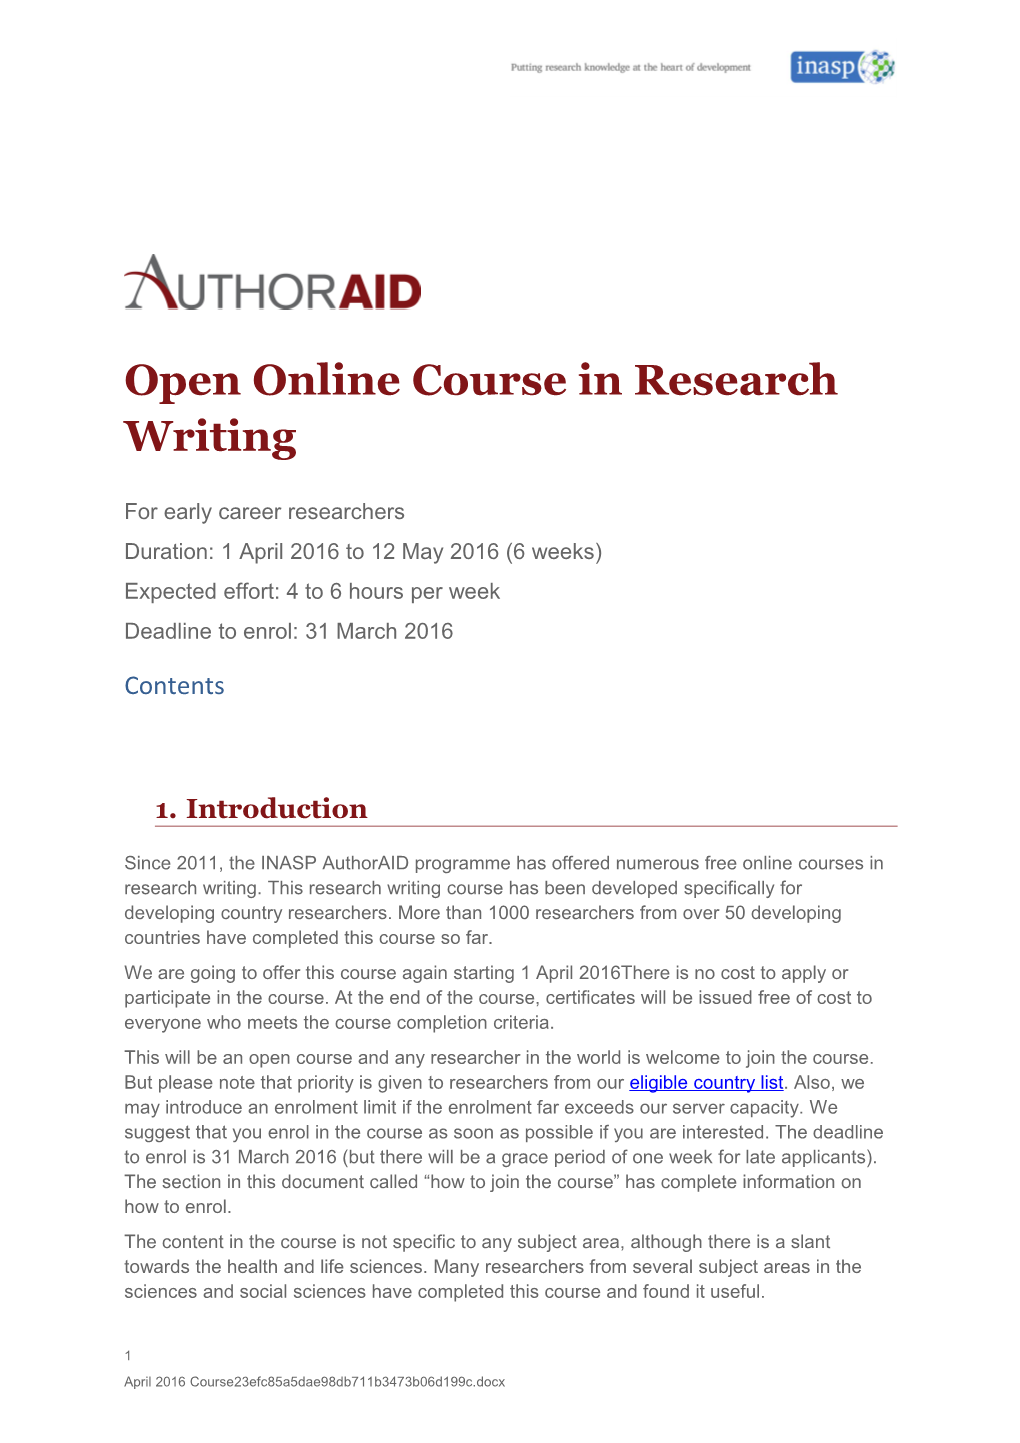 Open Online Course in Research Writing